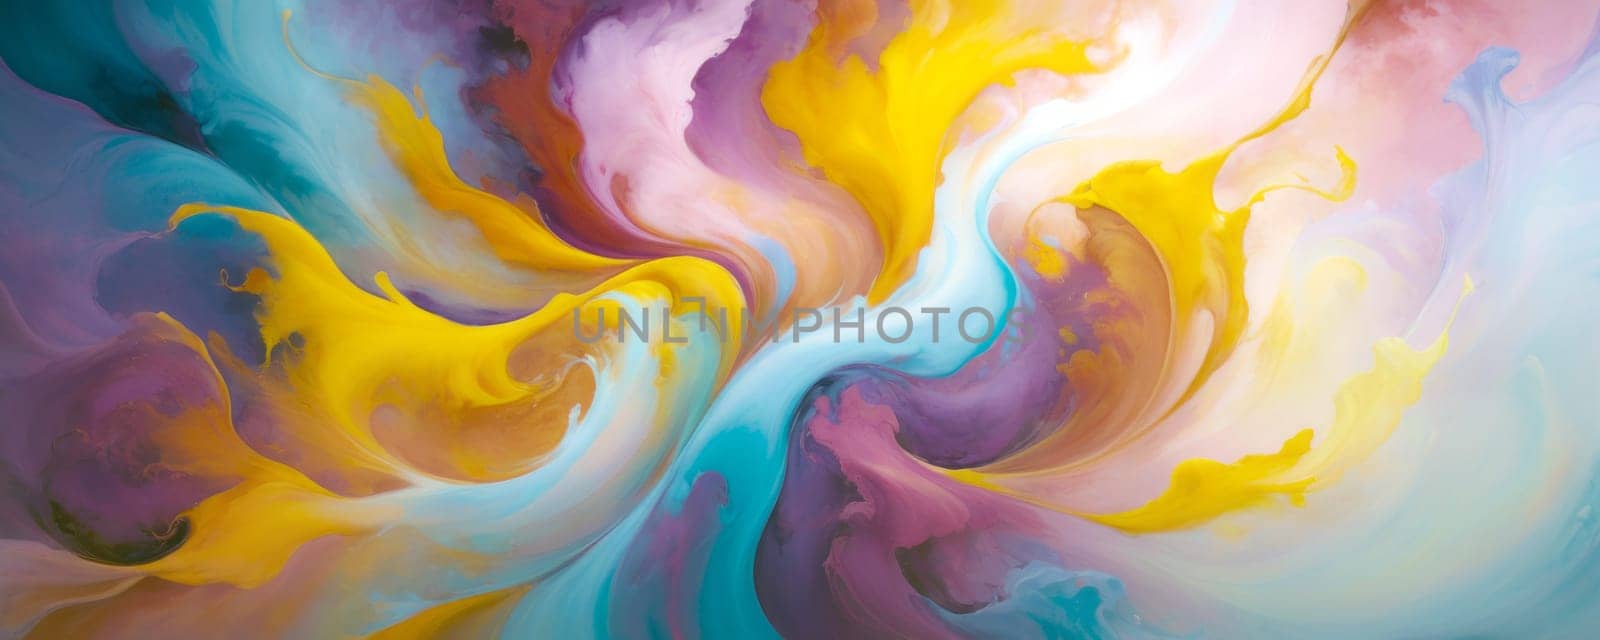 An abstract mix of swirling colors on a light background. The colors include shades of yellow, blue, purple, and pink that blend seamlessly into each other, creating a dynamic and fluid visual effect. The swirl gives a sense of movement and energy, as if the colors are in motion. There is no distinct shape or object, instead, the focus is on the interplay of colors and forms. The image has a vibrant and lively mood due to the bright color palette. Generative AI